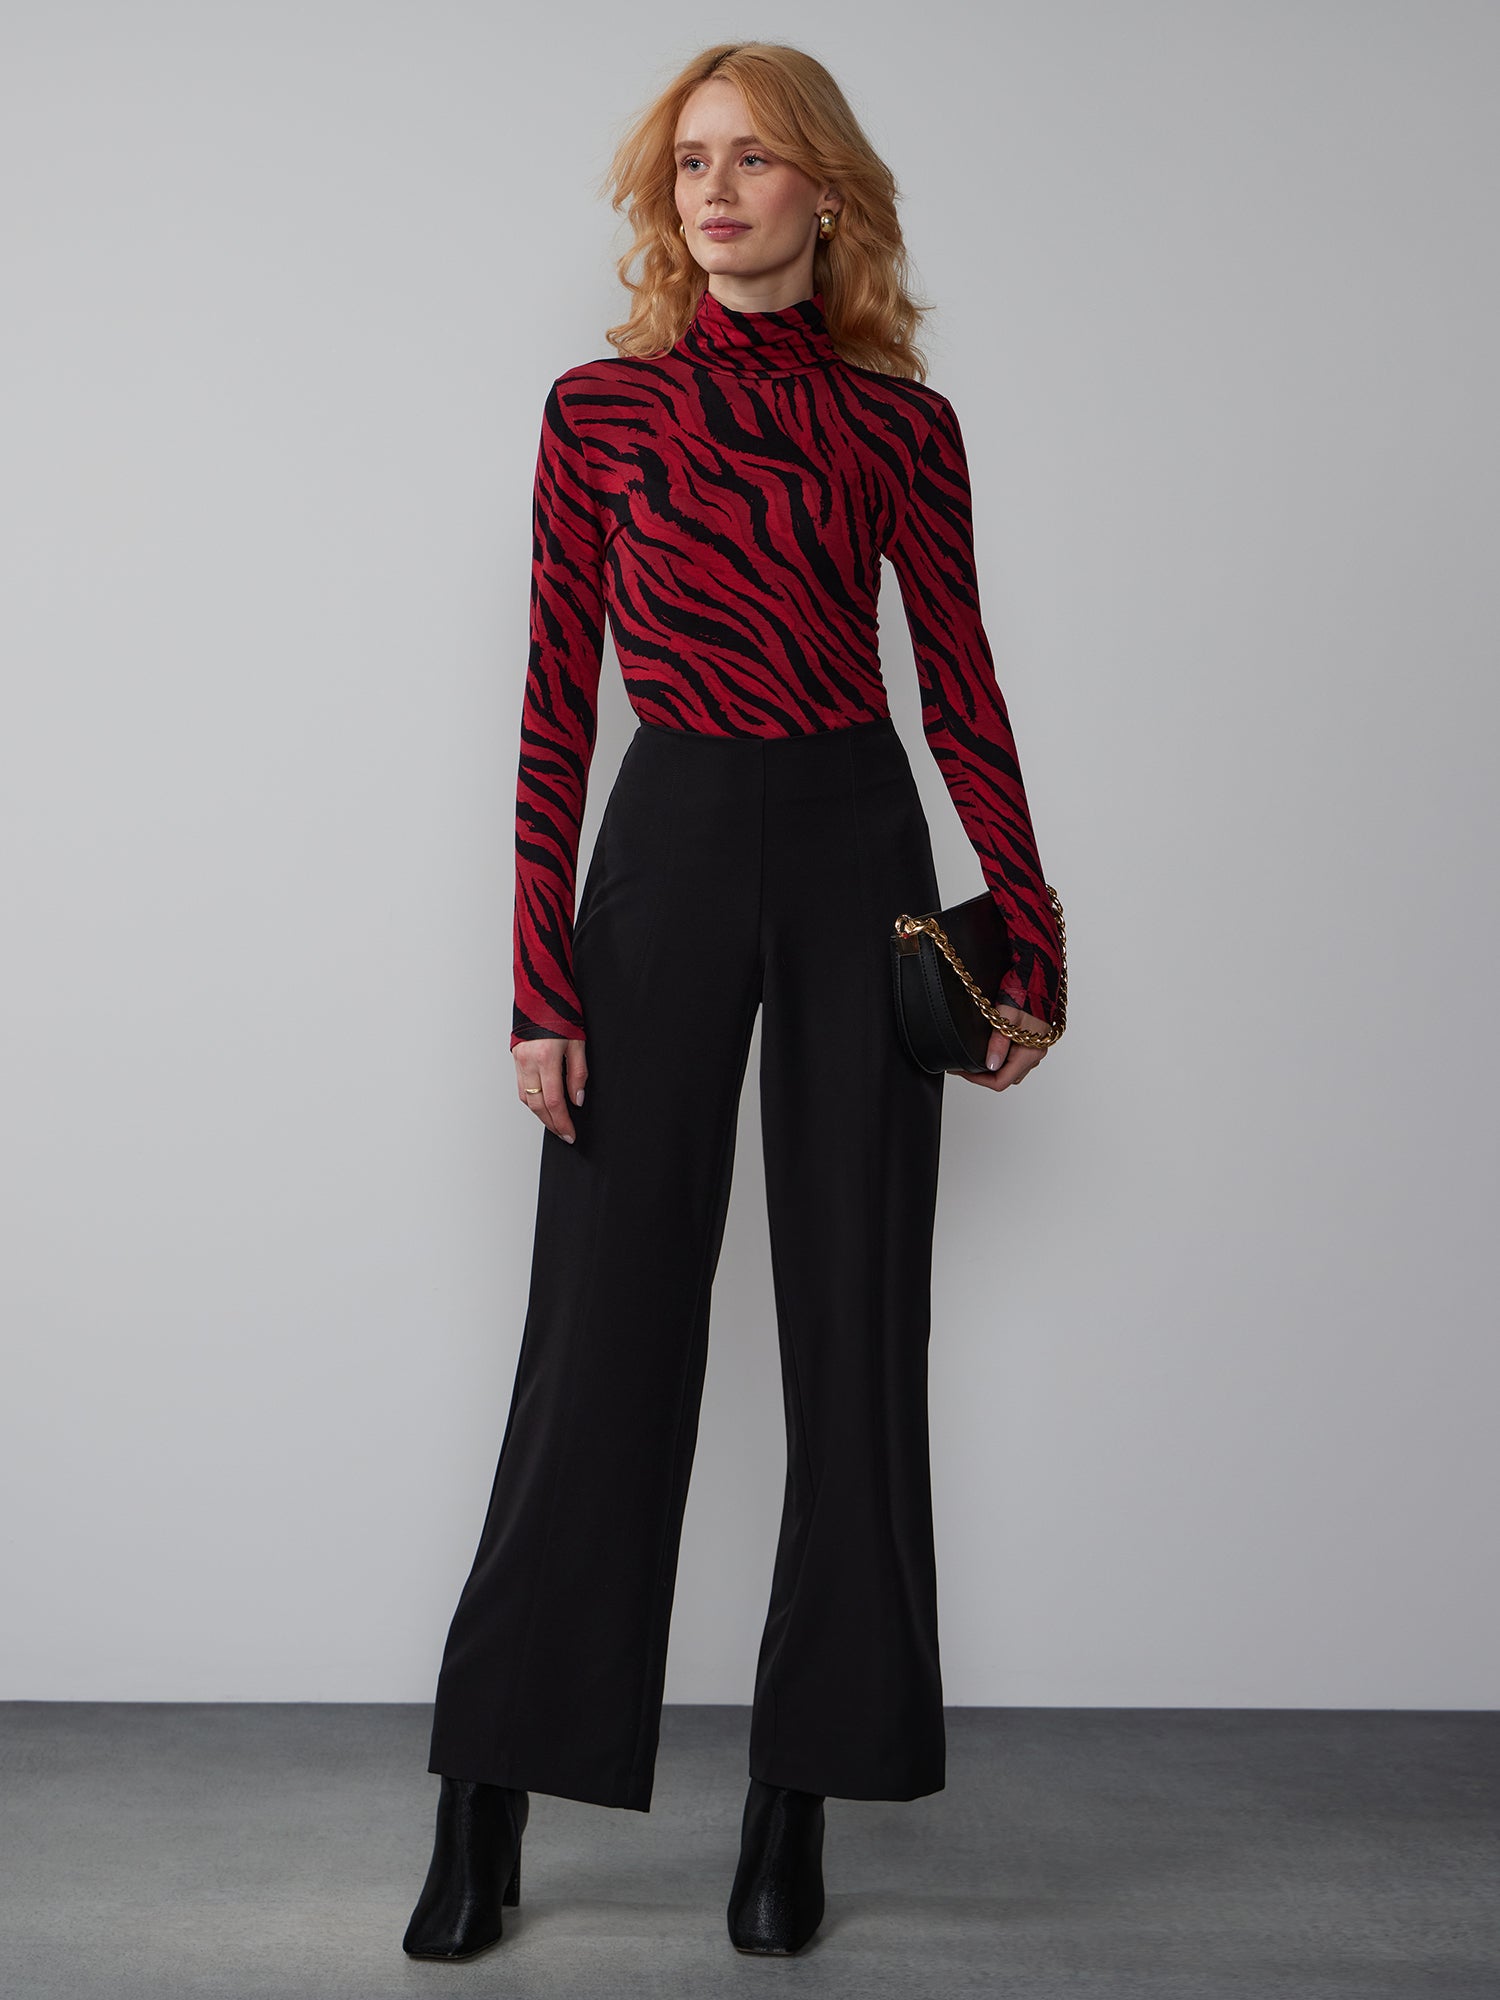 Tall Fit To Flatter Flared Seamed Pant